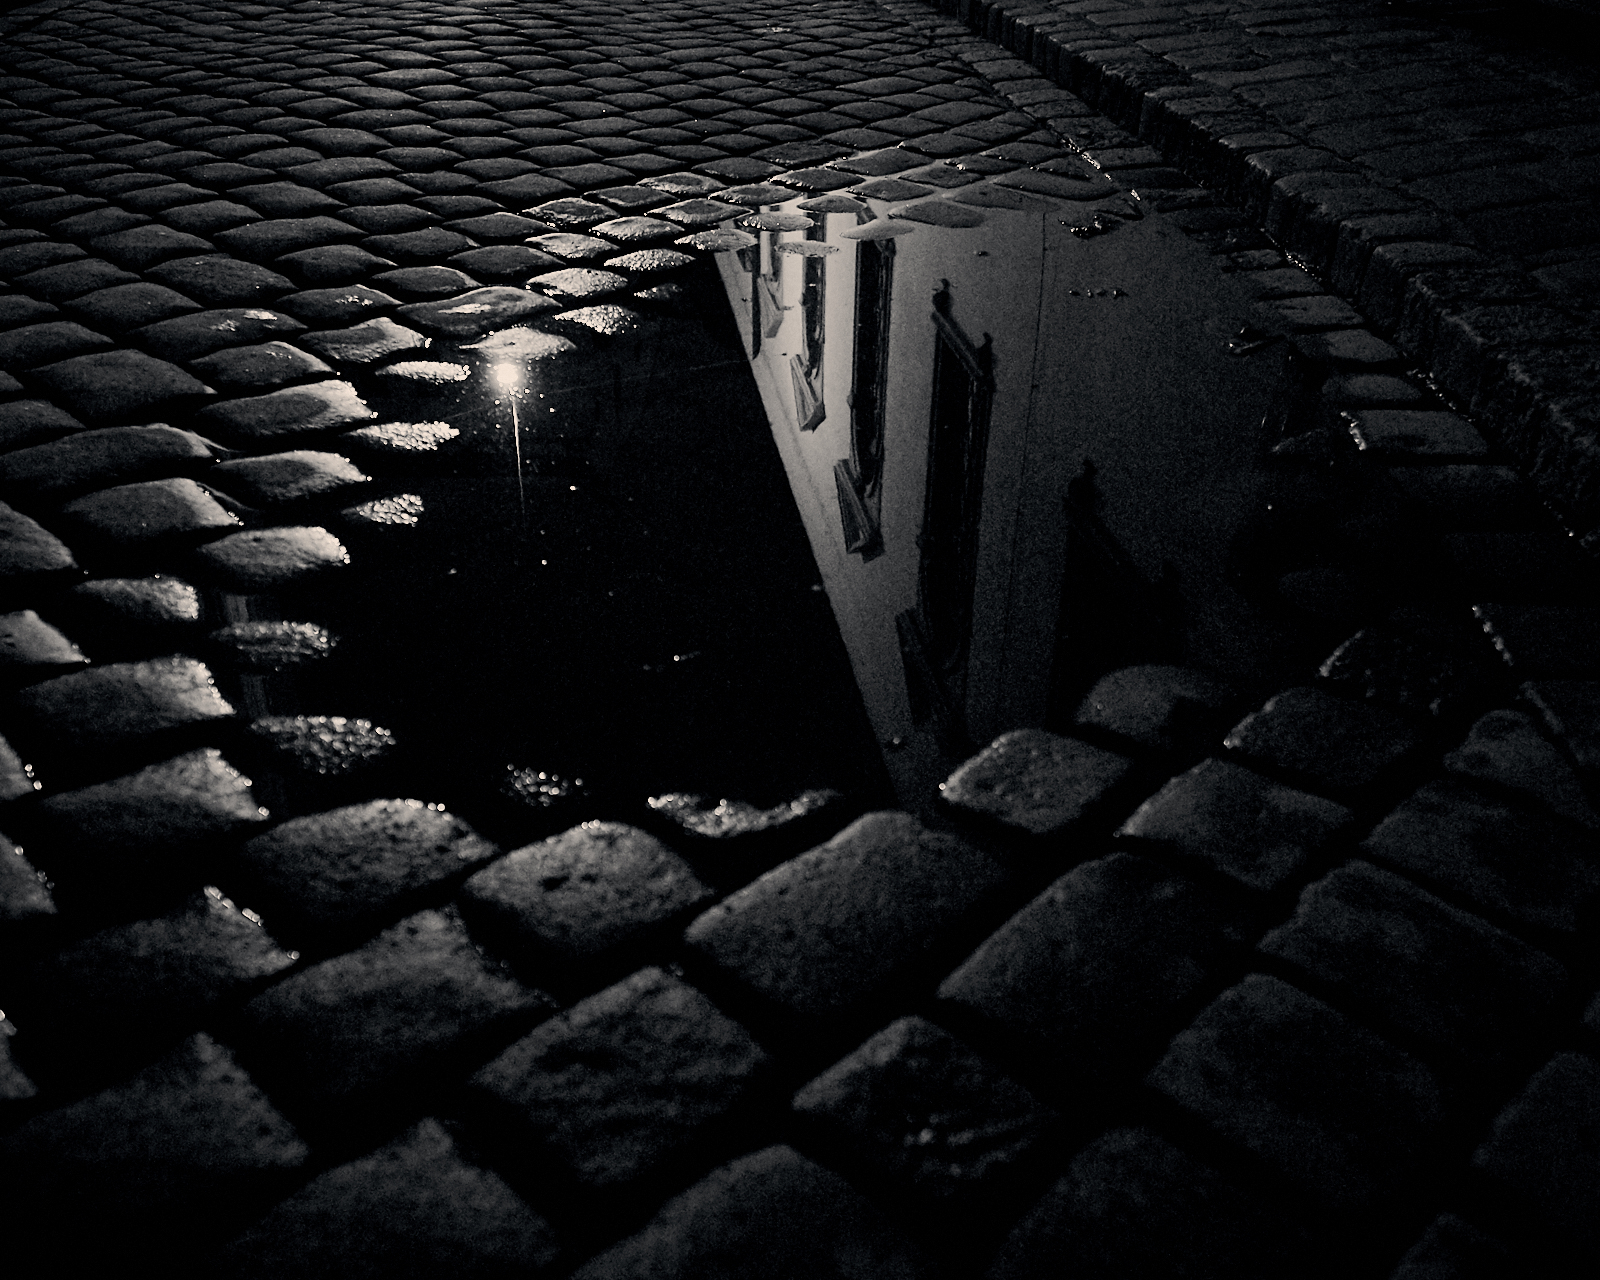 A puddle reflects a streetlight late at night.